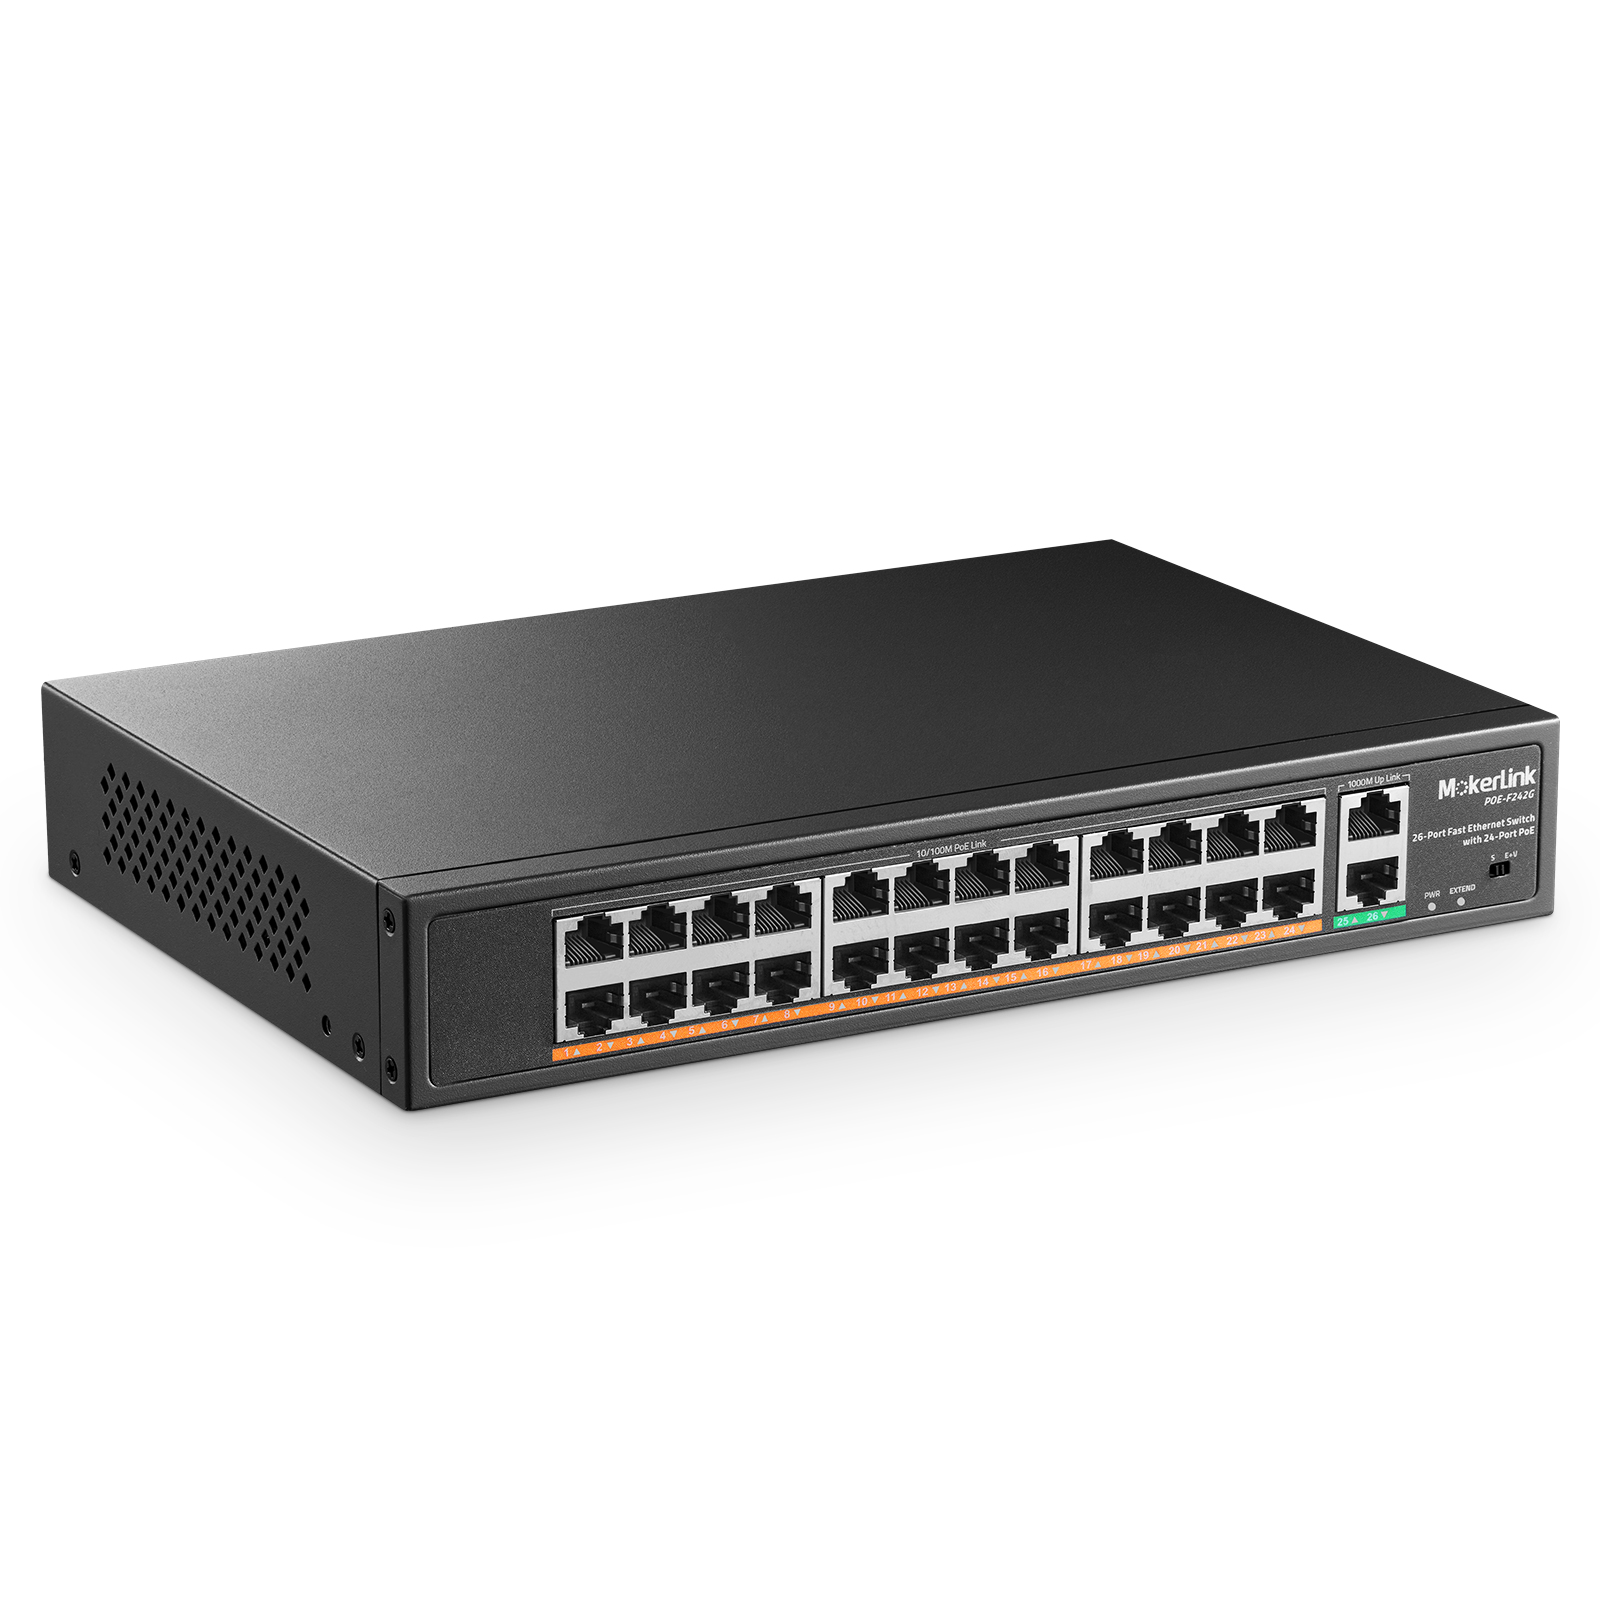 MokerLink Store - 26-Port Fast Ethernet Switch witch 24-Port PoE